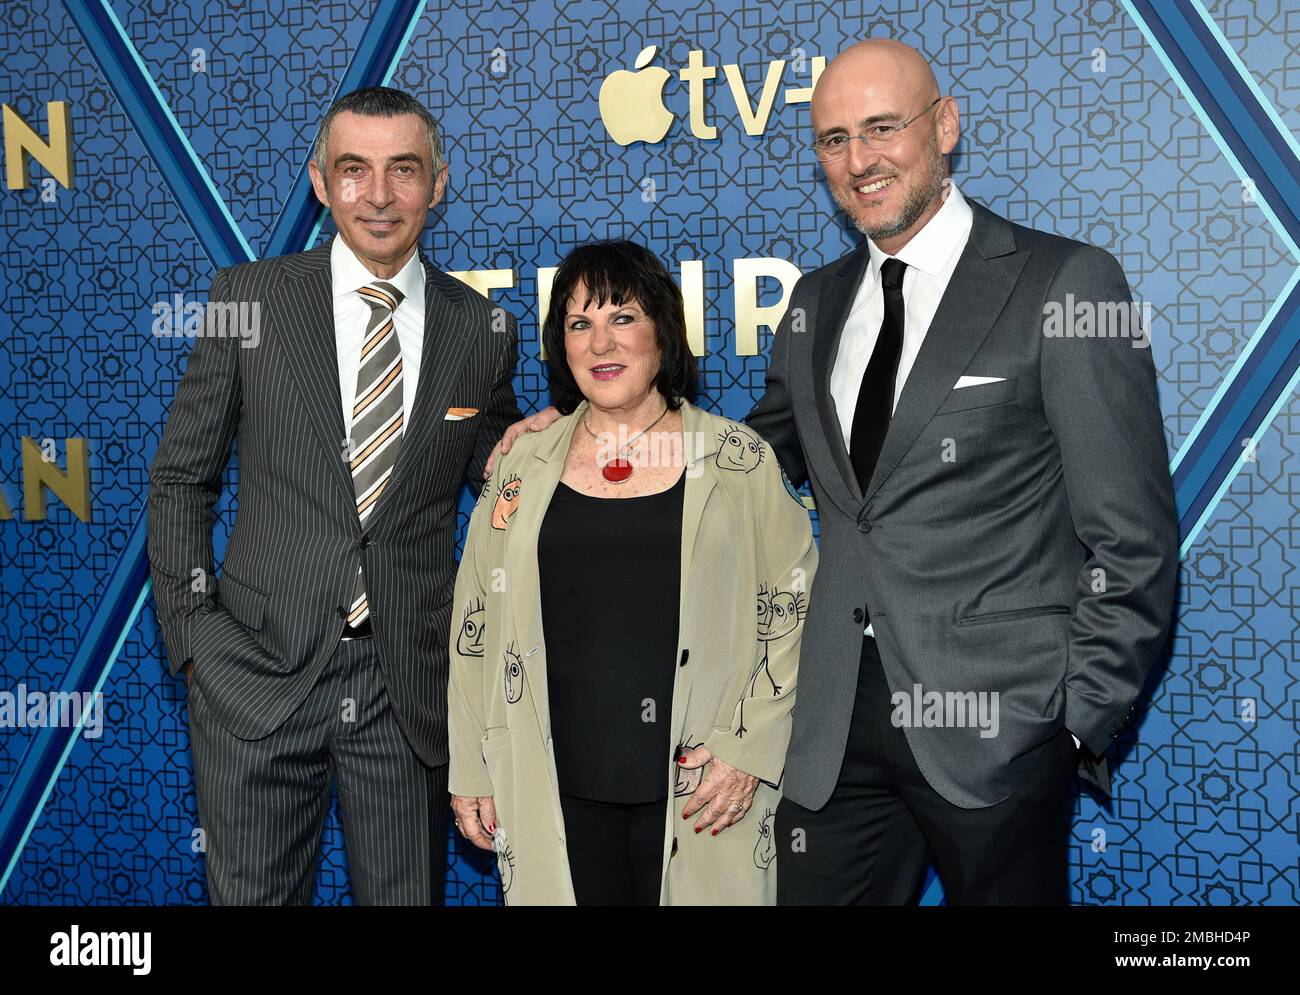 Actor Shaun Toub, left, executive producer Shula Spiegel and co-creator  writer/director Daniel Syrkin attend Apple TV's "Tehran" season two  premiere at the Robin Williams Center on Wednesday, May 4, 2022, in New